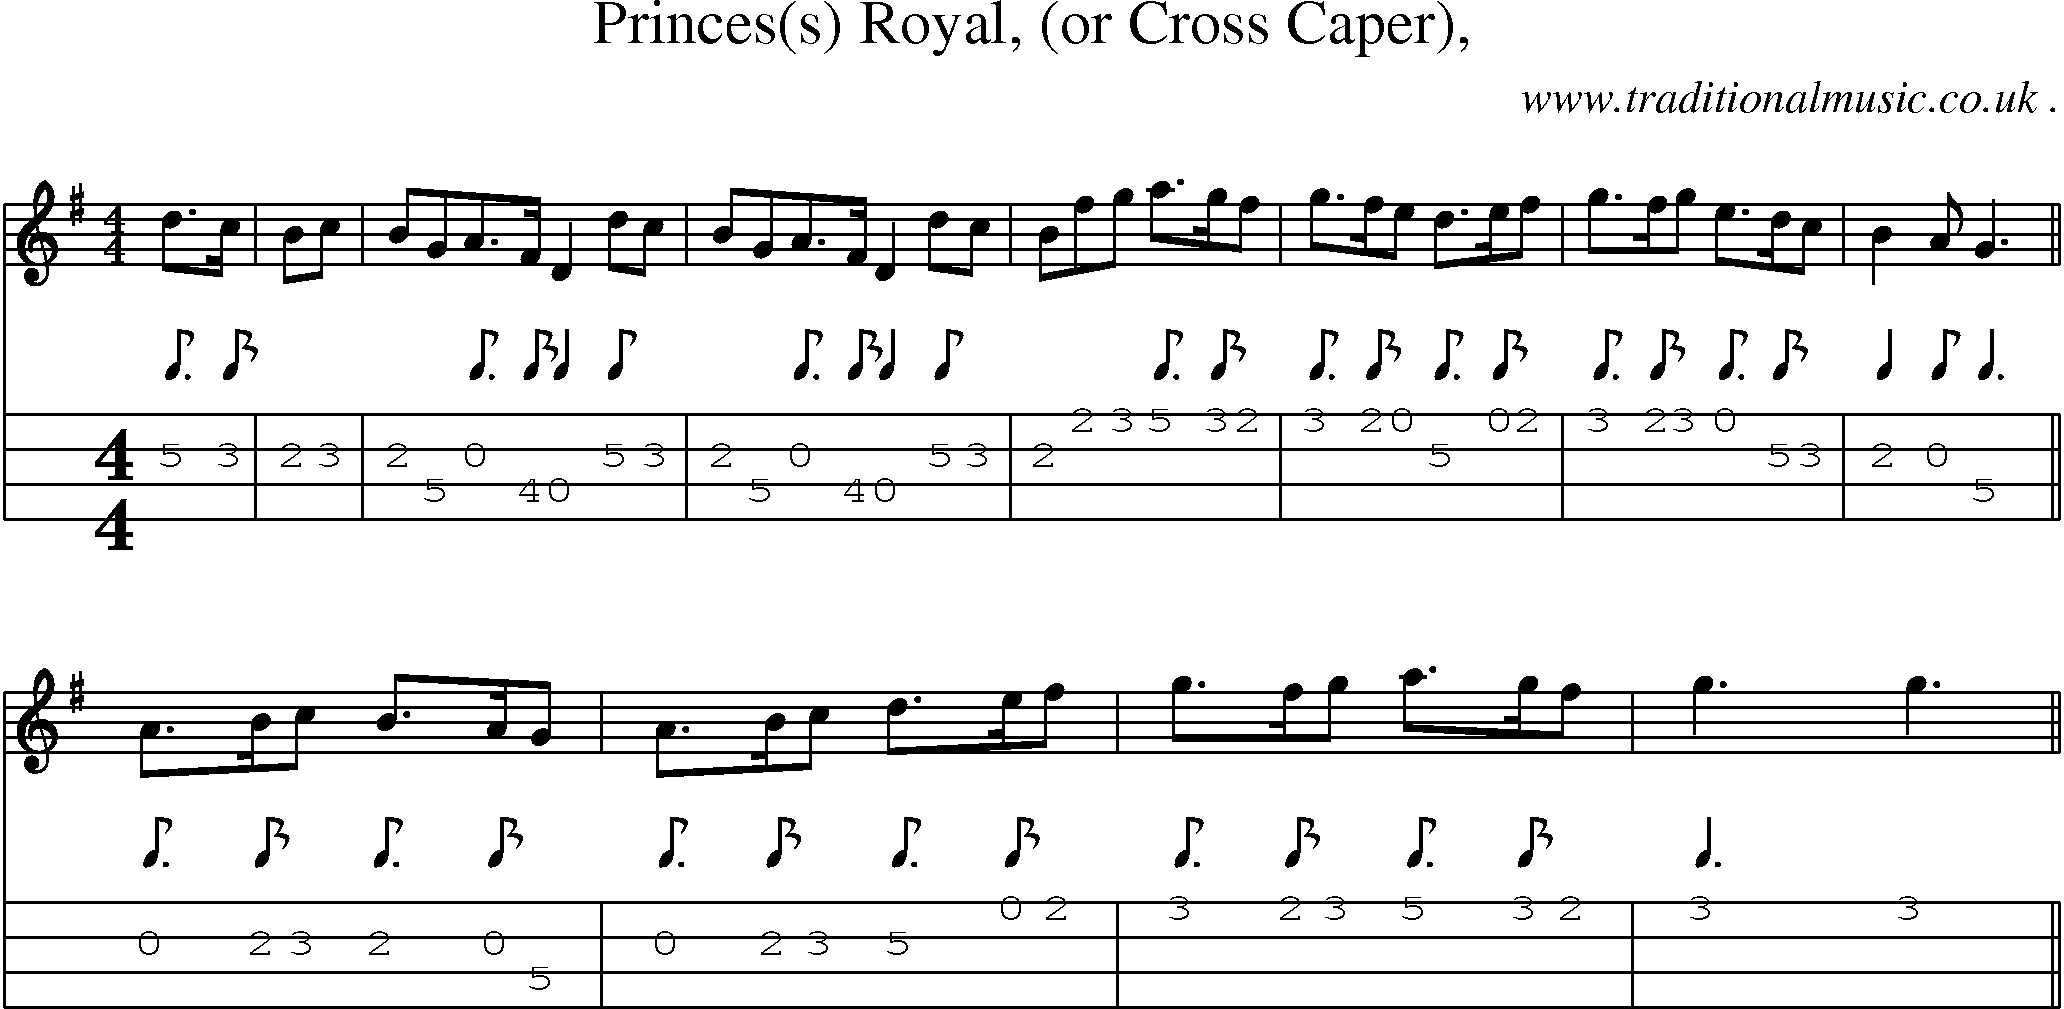 Sheet-Music and Mandolin Tabs for Princes(s) Royal (or Cross Caper) 